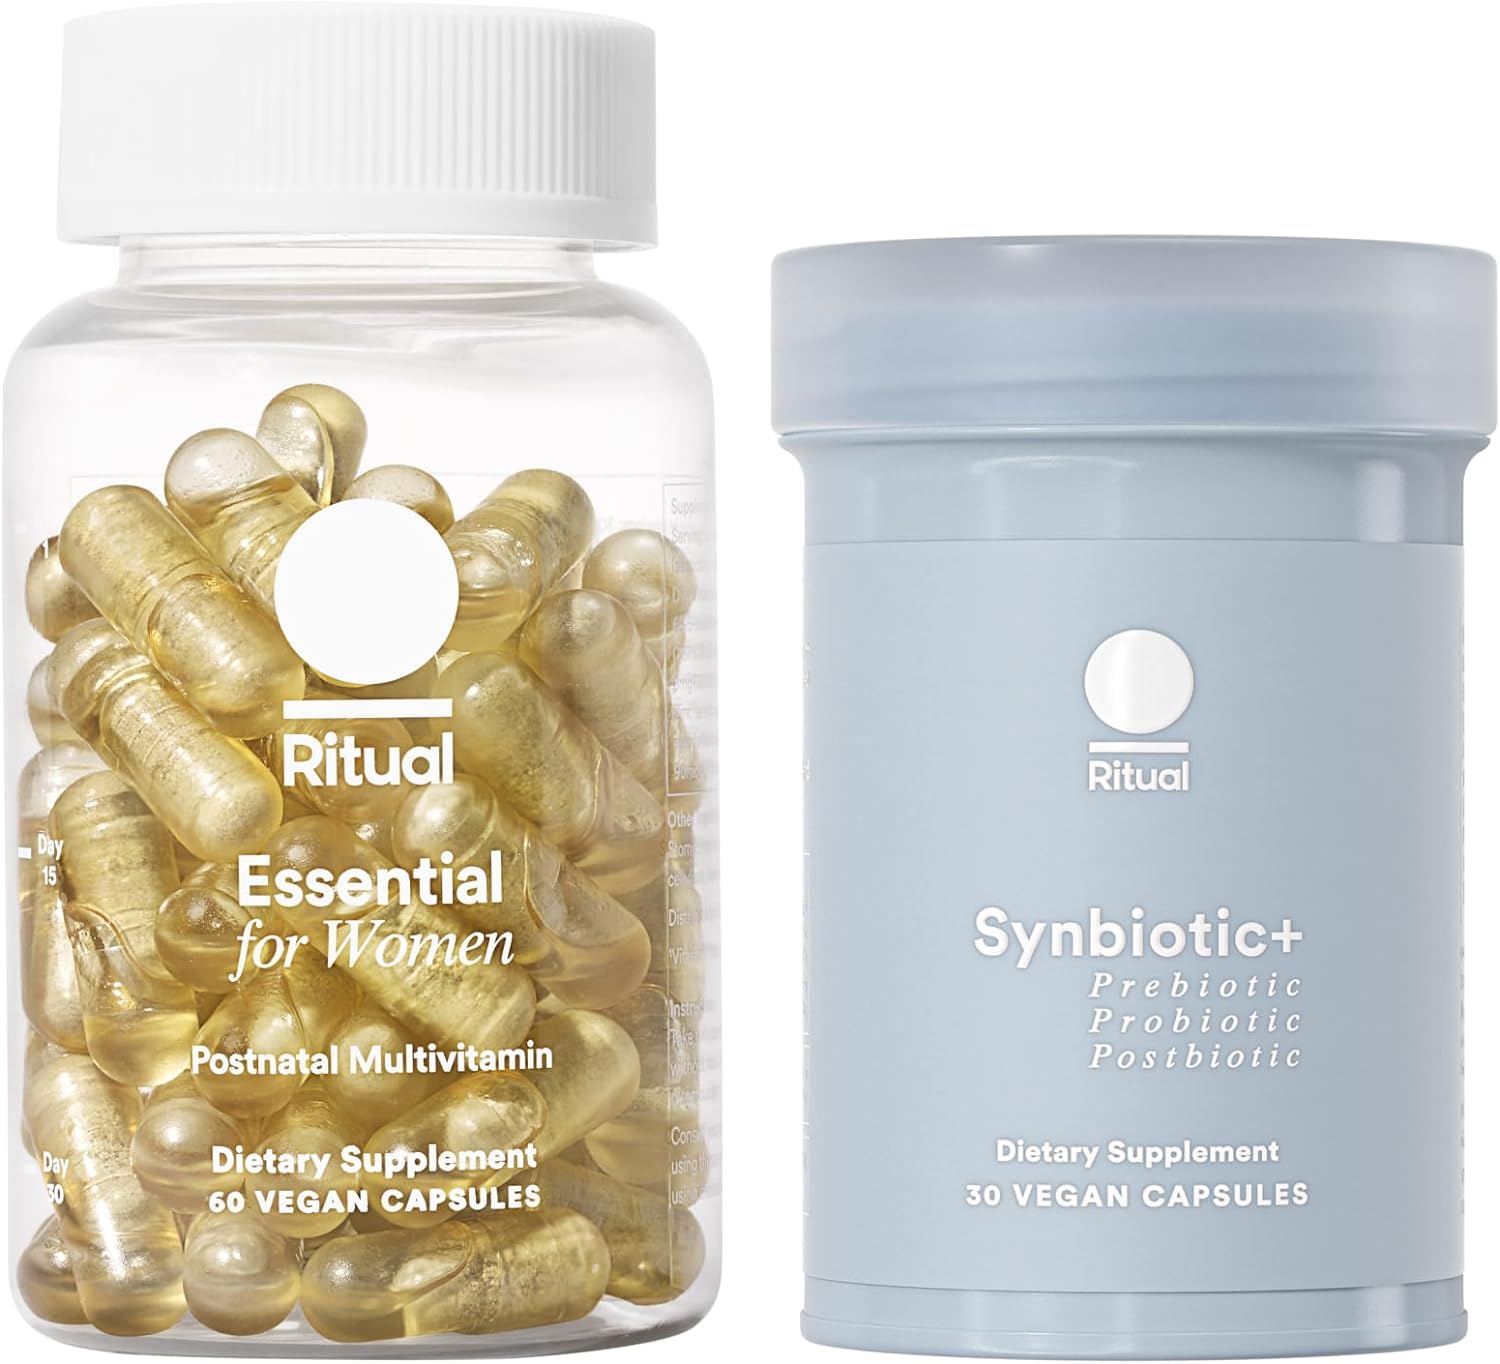 Ritual Postnatal Multivitamin and Gut Duo Supplements with Postnatal Vitamins and Synbiotic+: 3-in-1 Probiotic, Prebiotic, Postbiotic, Supports Lactation, and Gut Health, 30 Day Supply